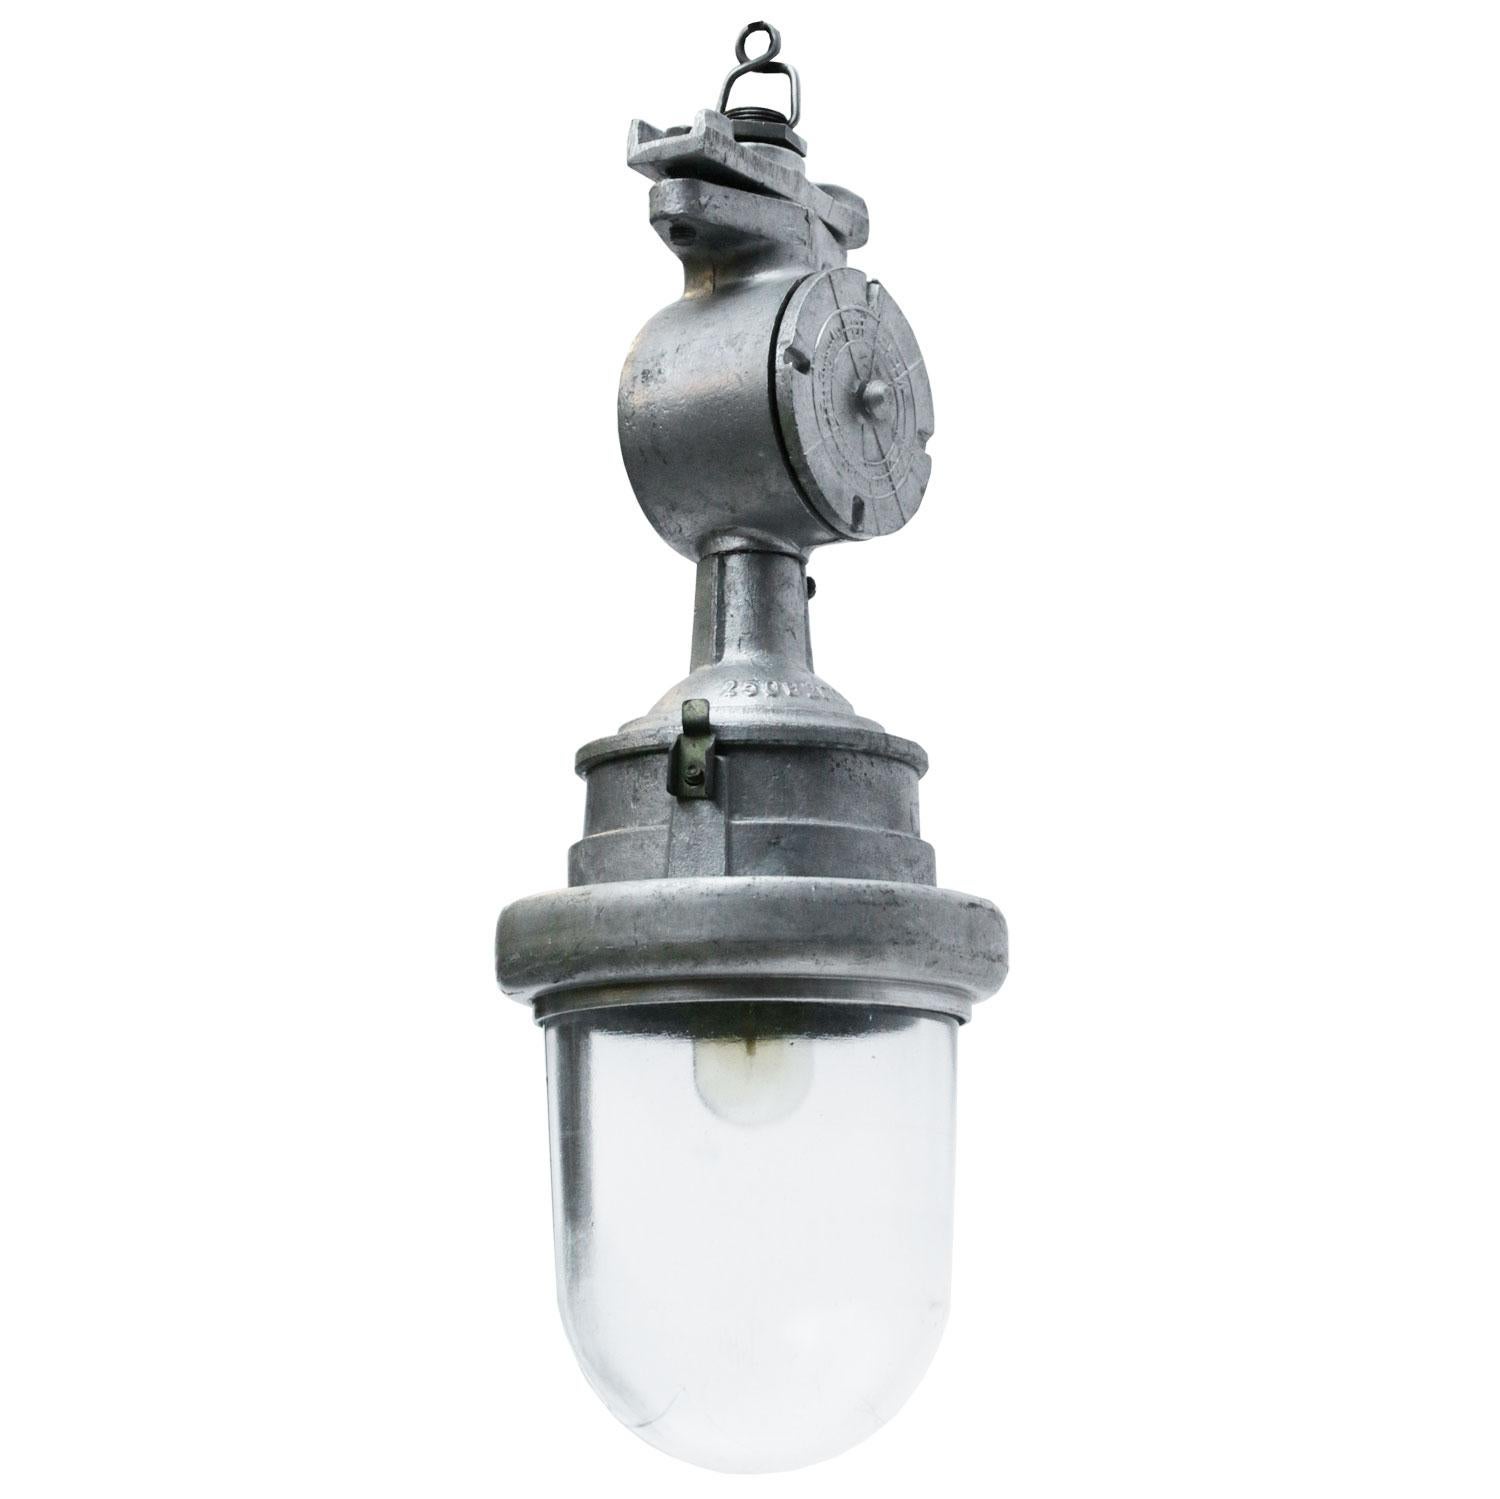 Industrial hanging lamp. Silver gray cast aluminum. Clear glass.

Weight: 7.0 kg / 15.4 lb

Priced per individual item. All lamps have been made suitable by international standards for incandescent light bulbs, energy-efficient and LED bulbs.